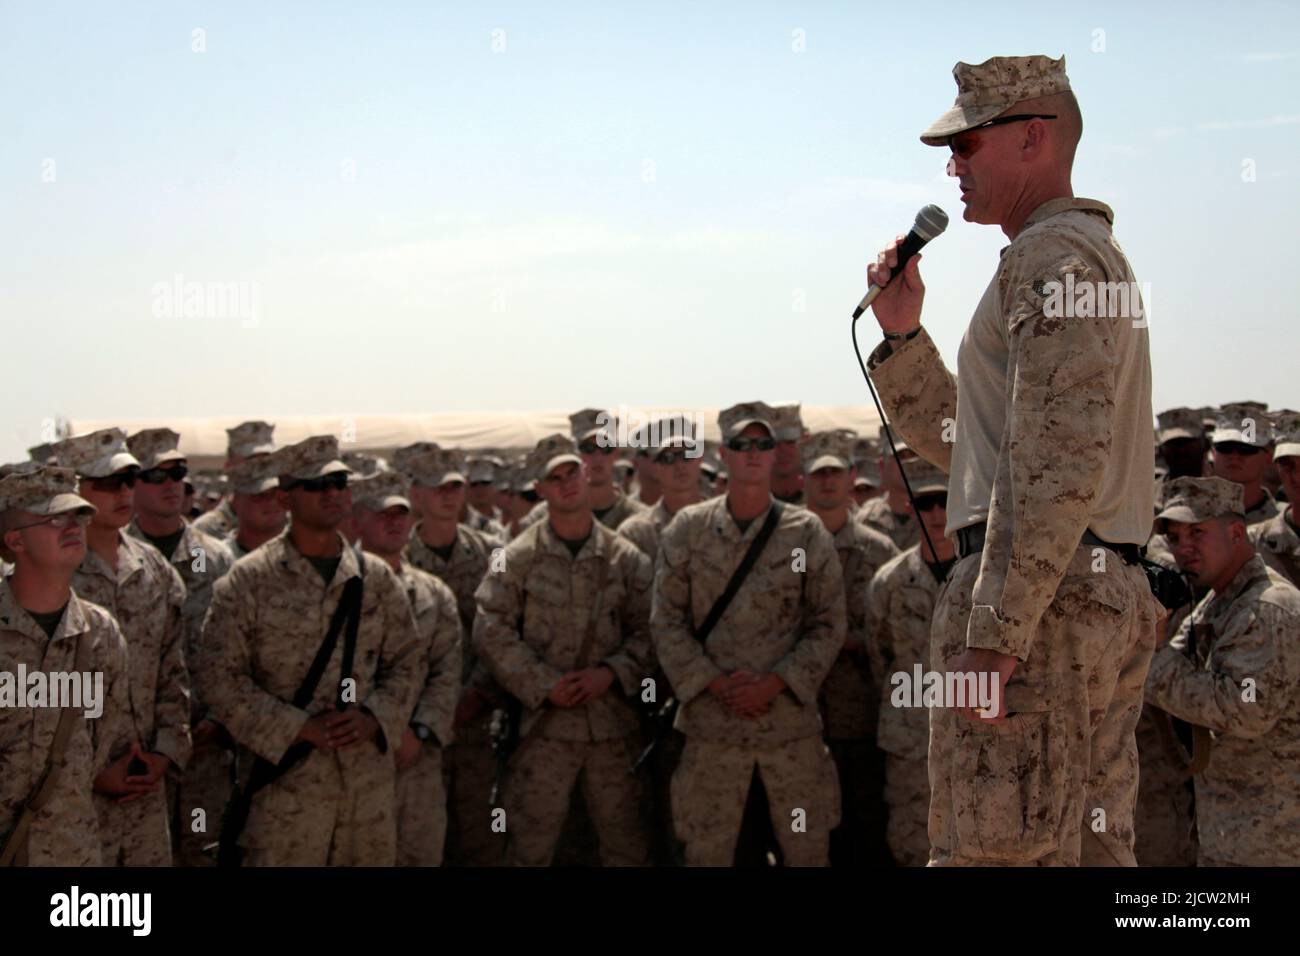 US Marine speaks to fellow Marines about completing their mission while deployed to the Helmond Province, Afghanistan. Stock Photo